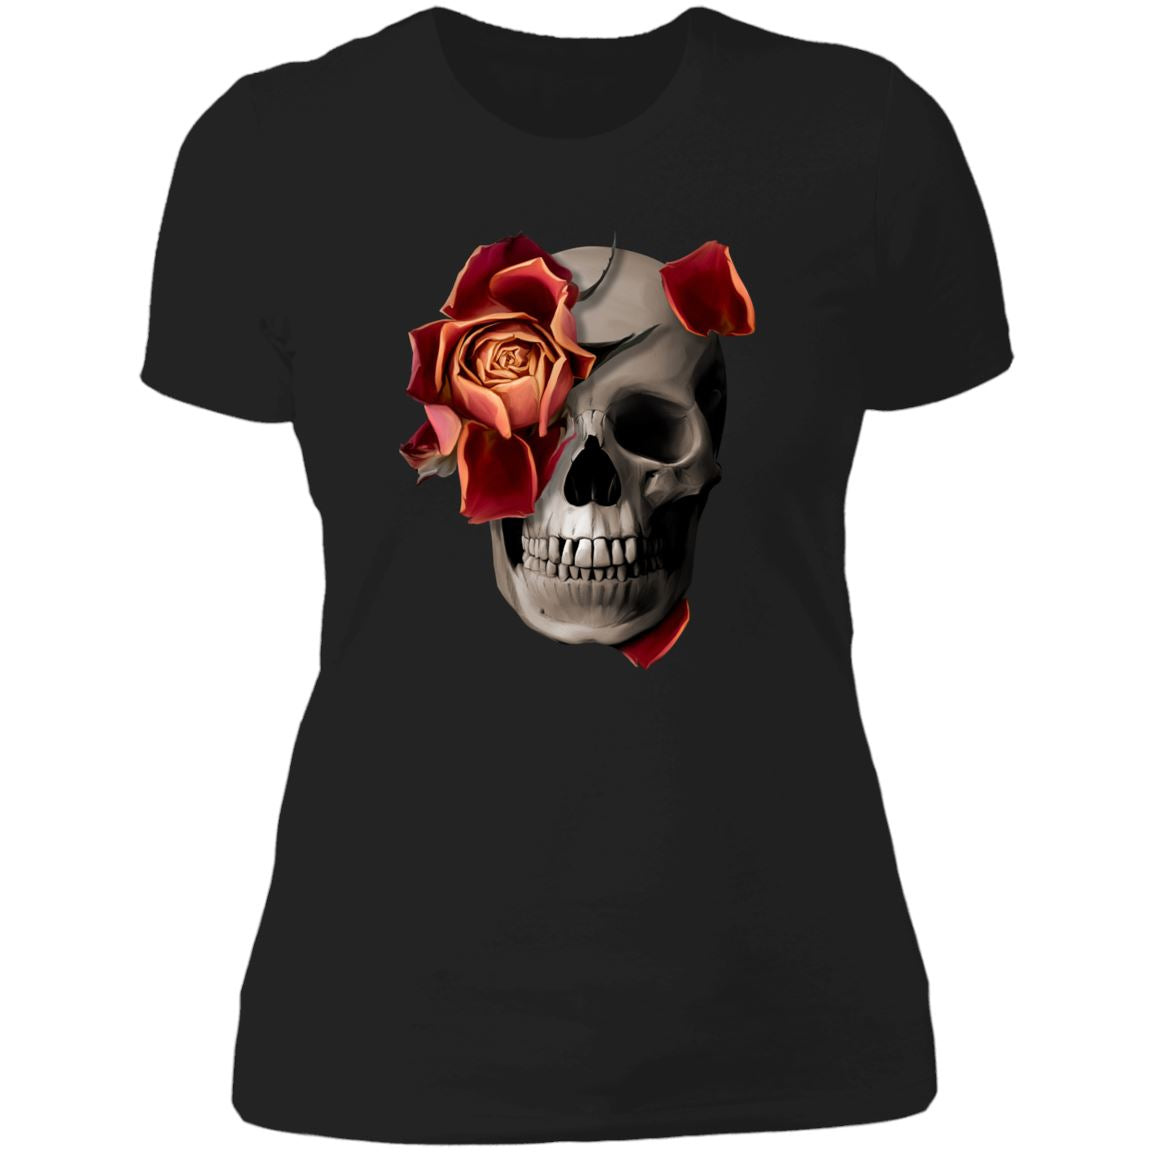 A Rose on the Skull Apparel